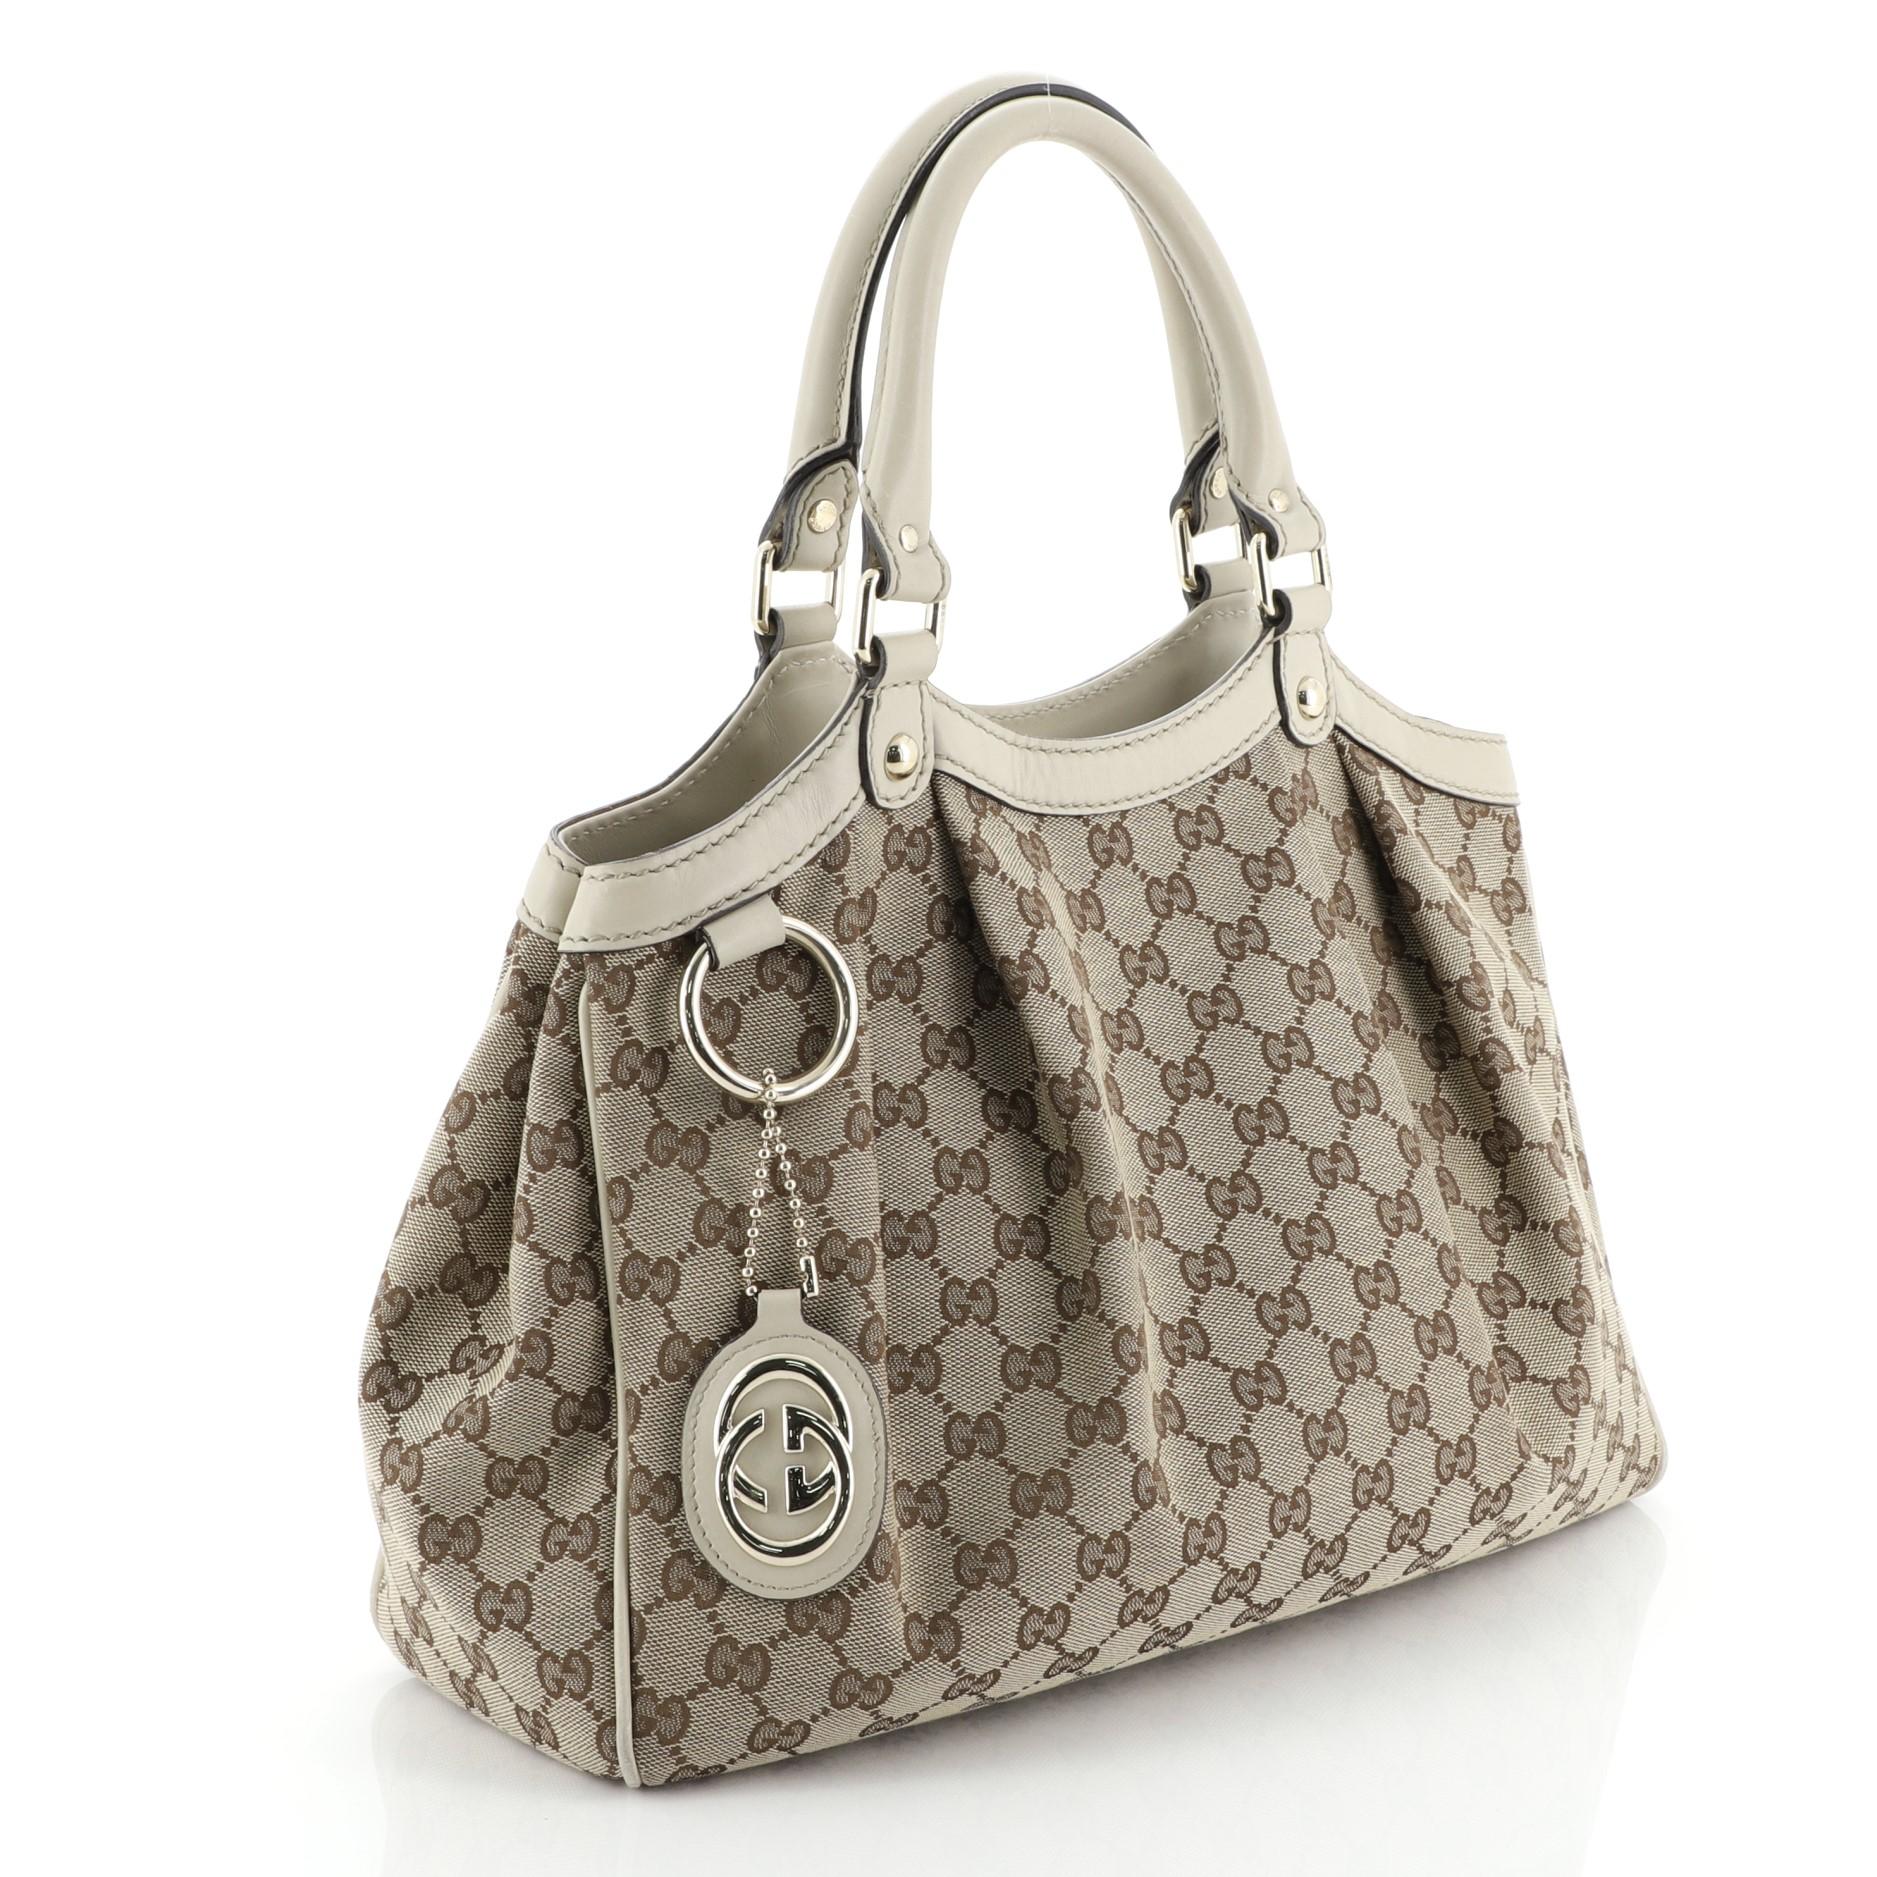 This Gucci Sukey Tote GG Canvas Medium, crafted from brown GG canvas, features dual rolled leather handles, side snap buttons, and gold-tone hardware. Its magnetic snap closure opens to a neutral fabric and canvas interior with zip pocket.